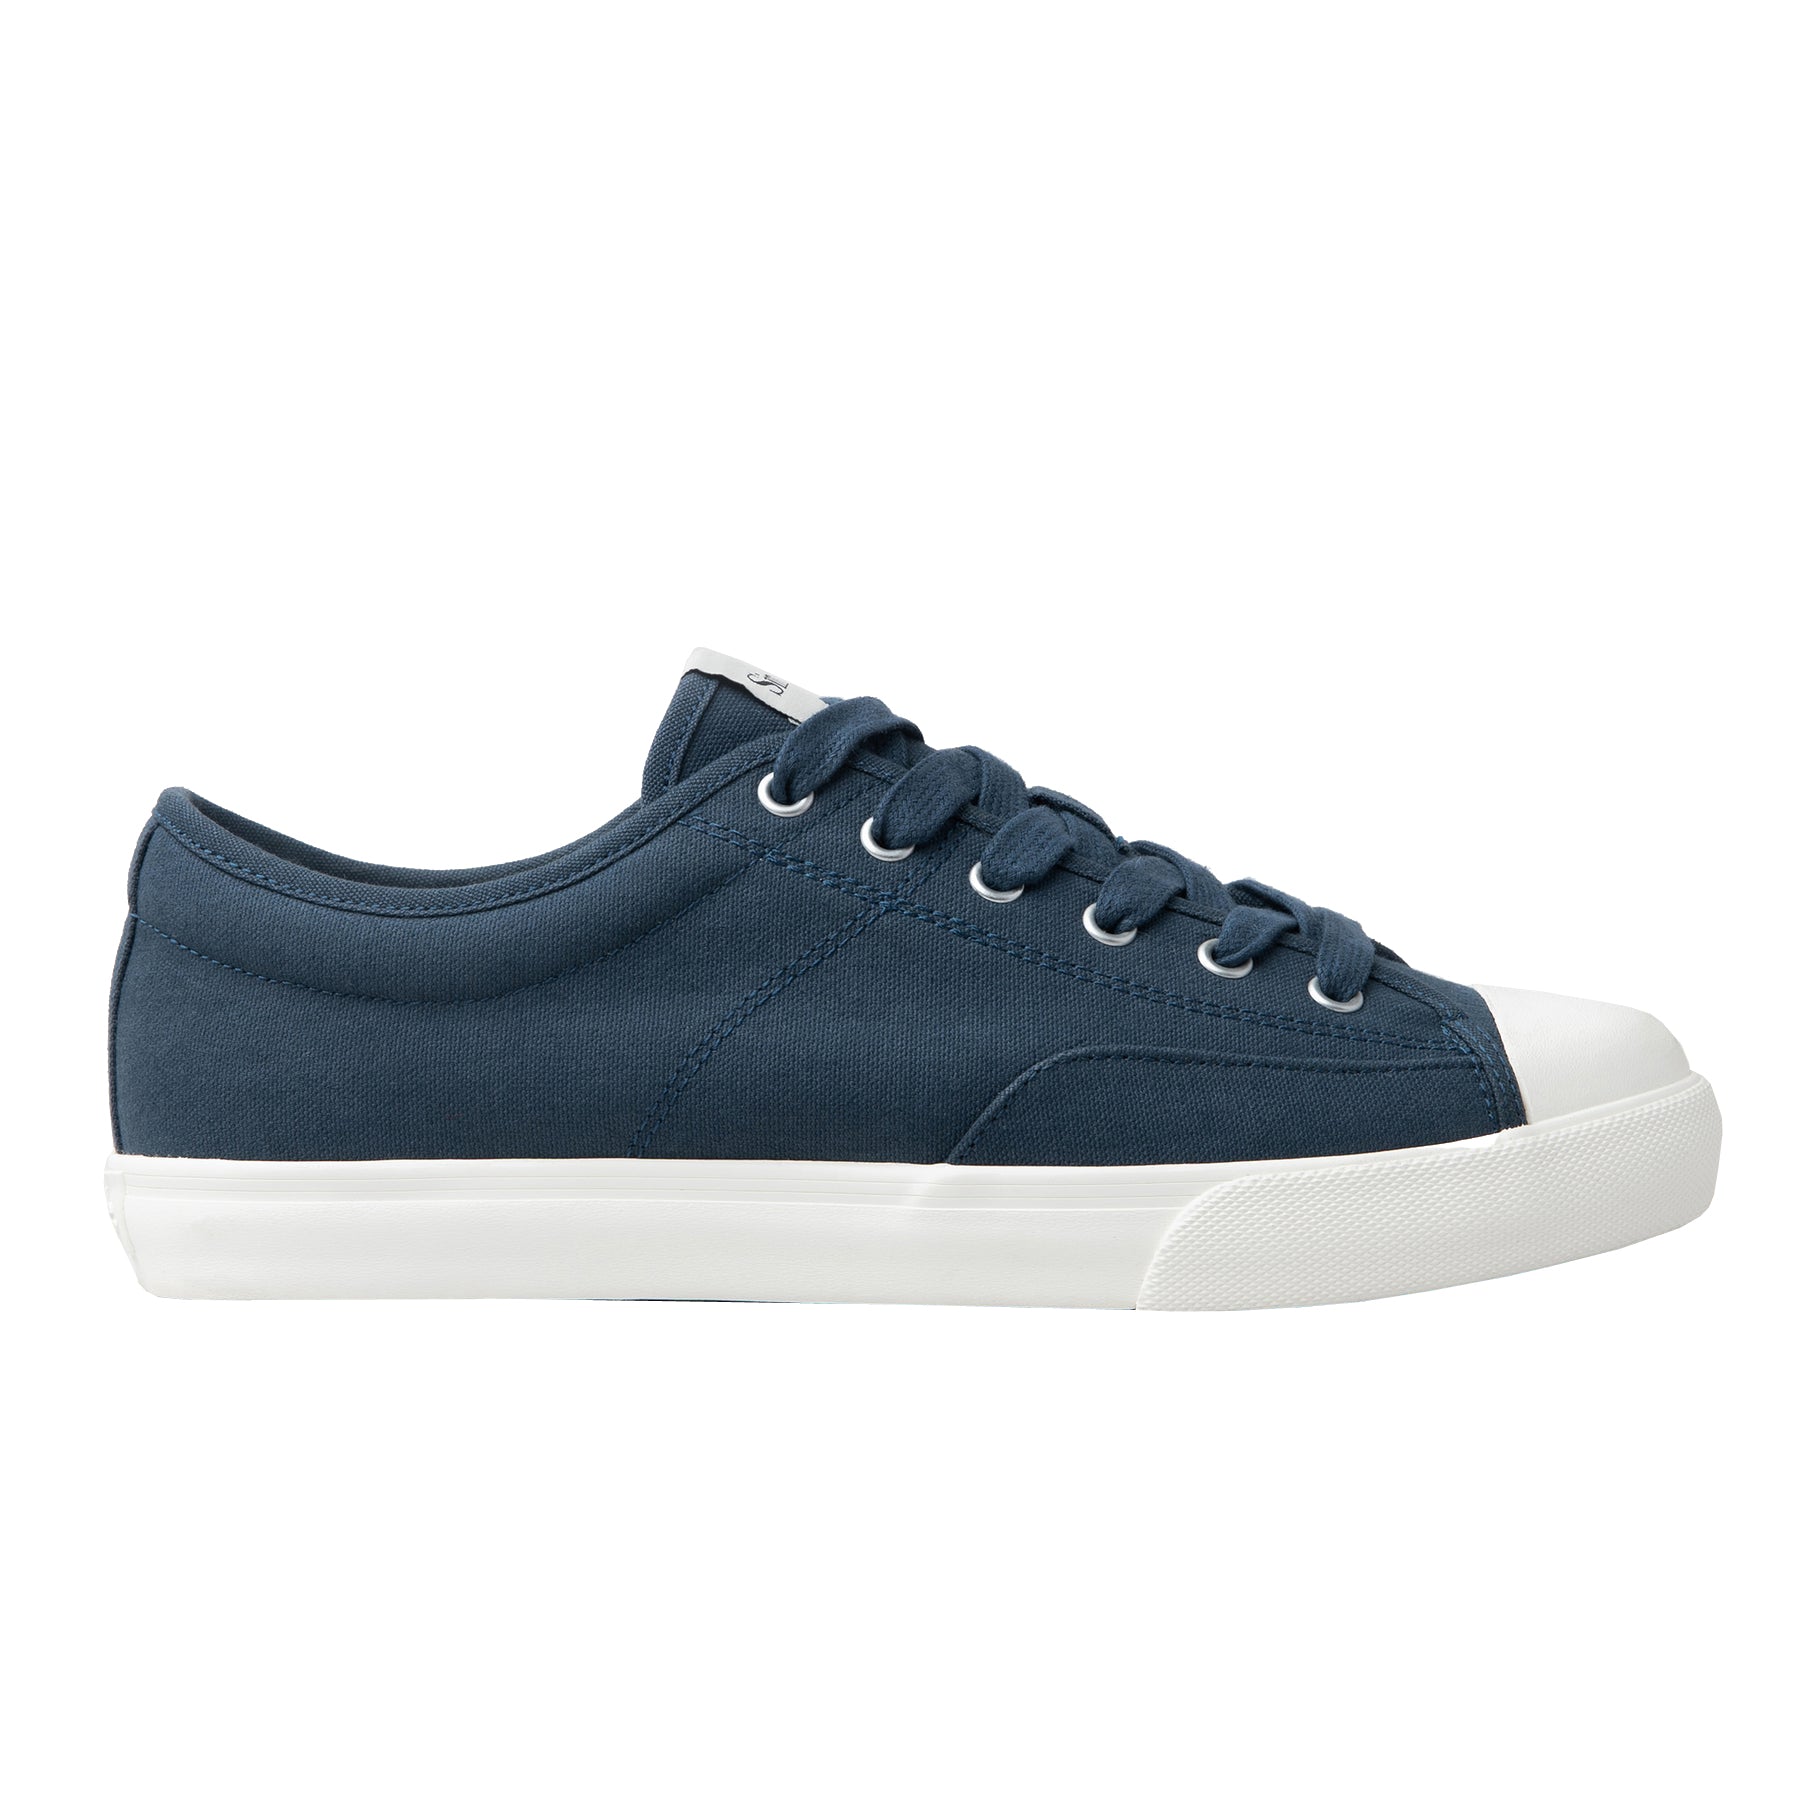 Simple S1 Shoes Navy 8.5